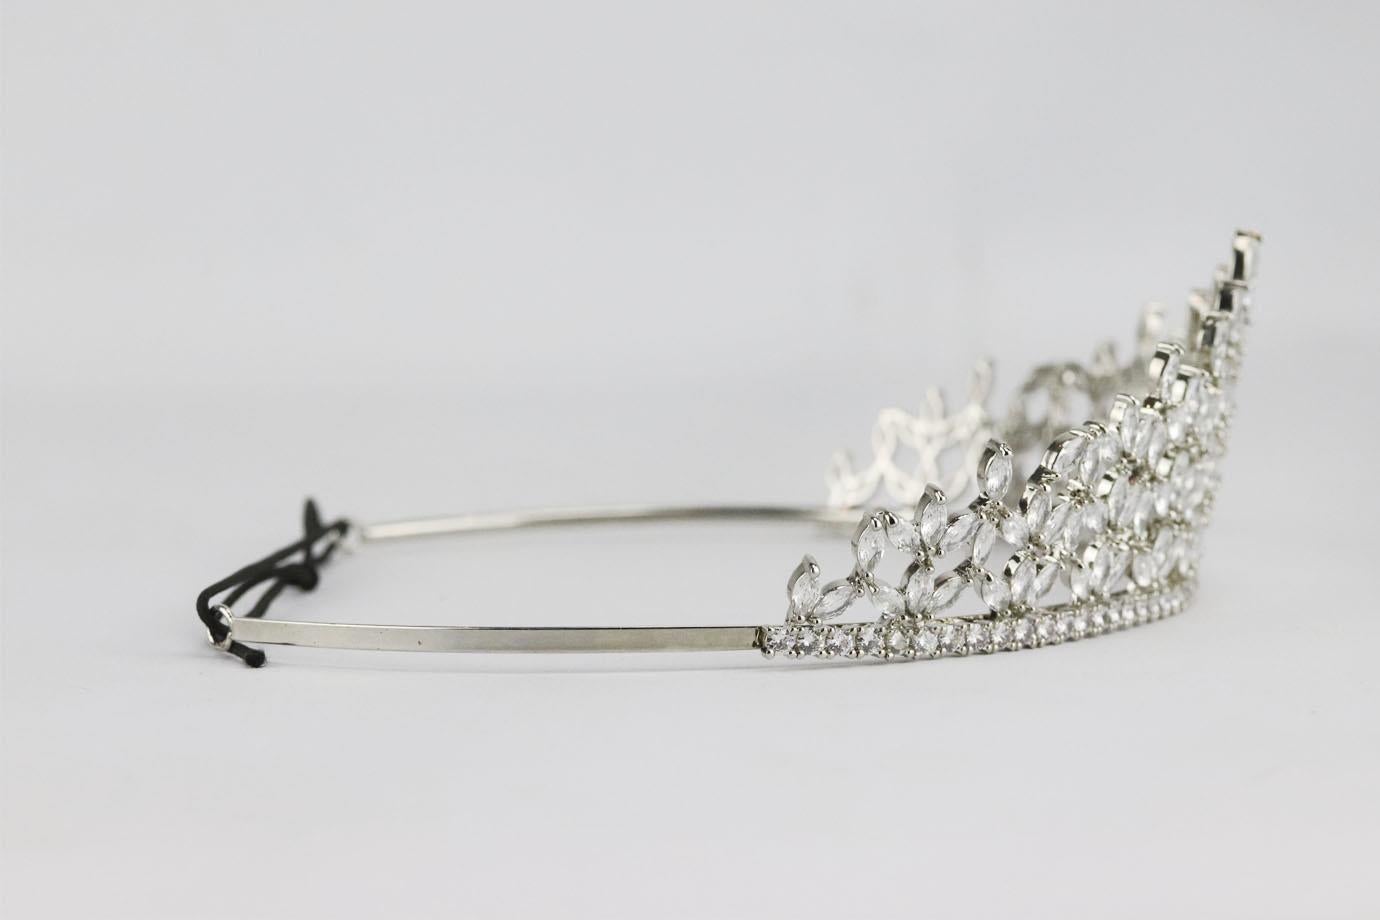 Unknown Brand silver tone crystal bridal crown. Silver. Pull on. Does not come with dustbag or box. Circumference: 14 in. Width: 2 in
